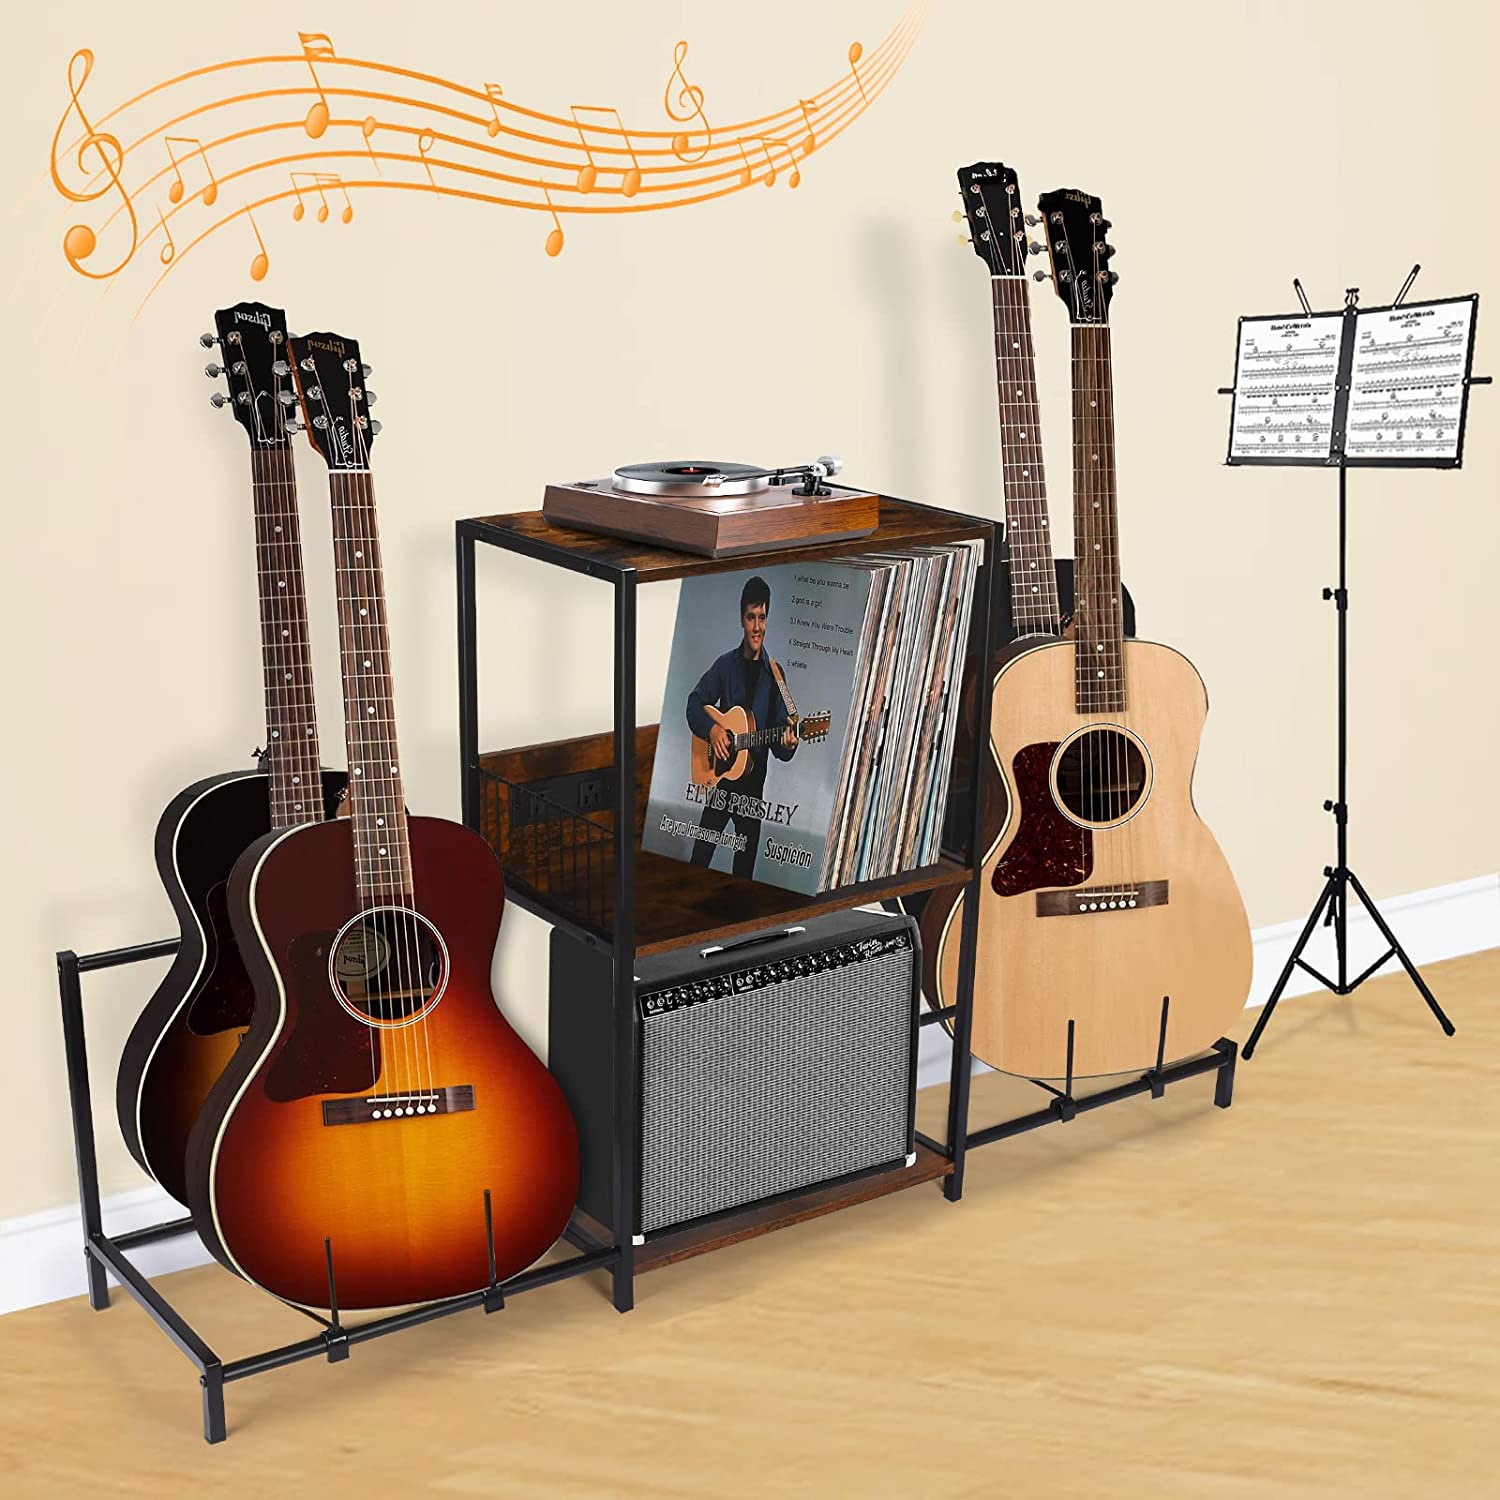 Guitar Stand with Charging Station, Guitar Rack Floor Adjustable for Multiple Guitars Holder for Acoustic, Electric Guitar, Bass, Guitar Amp Accessories, Guitars Display for Home Studio Music Room